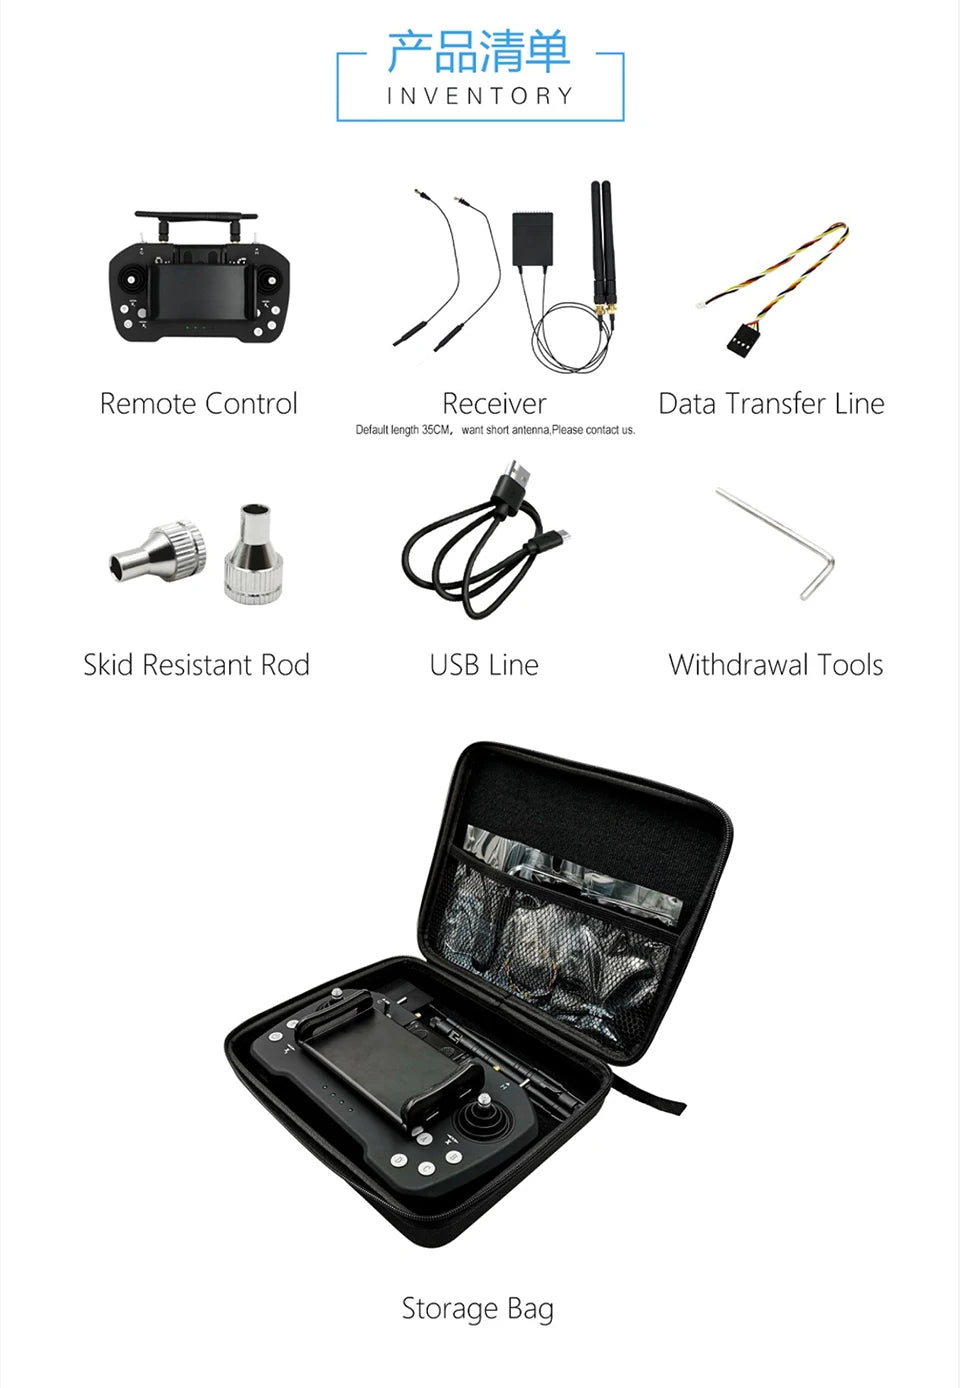 Skydroid M12 Pro Remote Controller, High-tech remote controller with receiver, antenna, and storage bag for organizing.